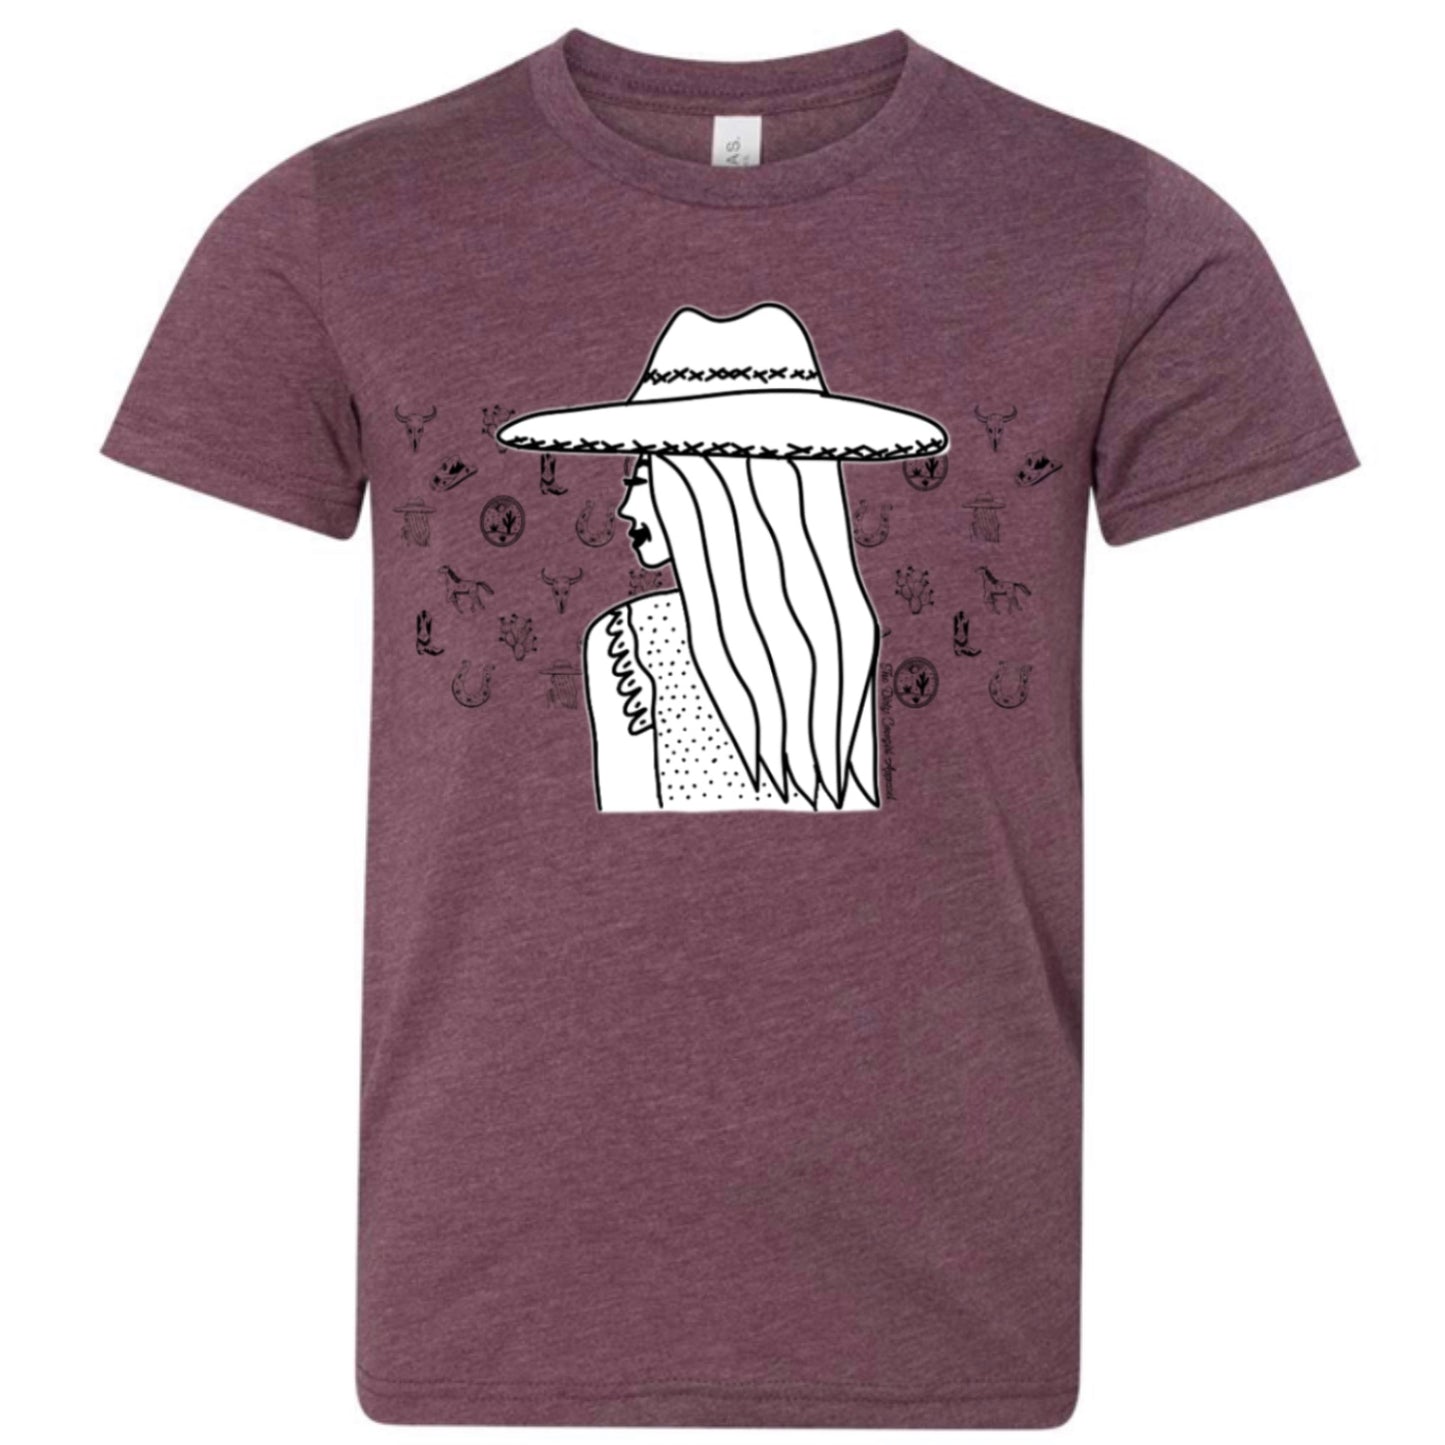 Cowgirl Sketch Youth Tee